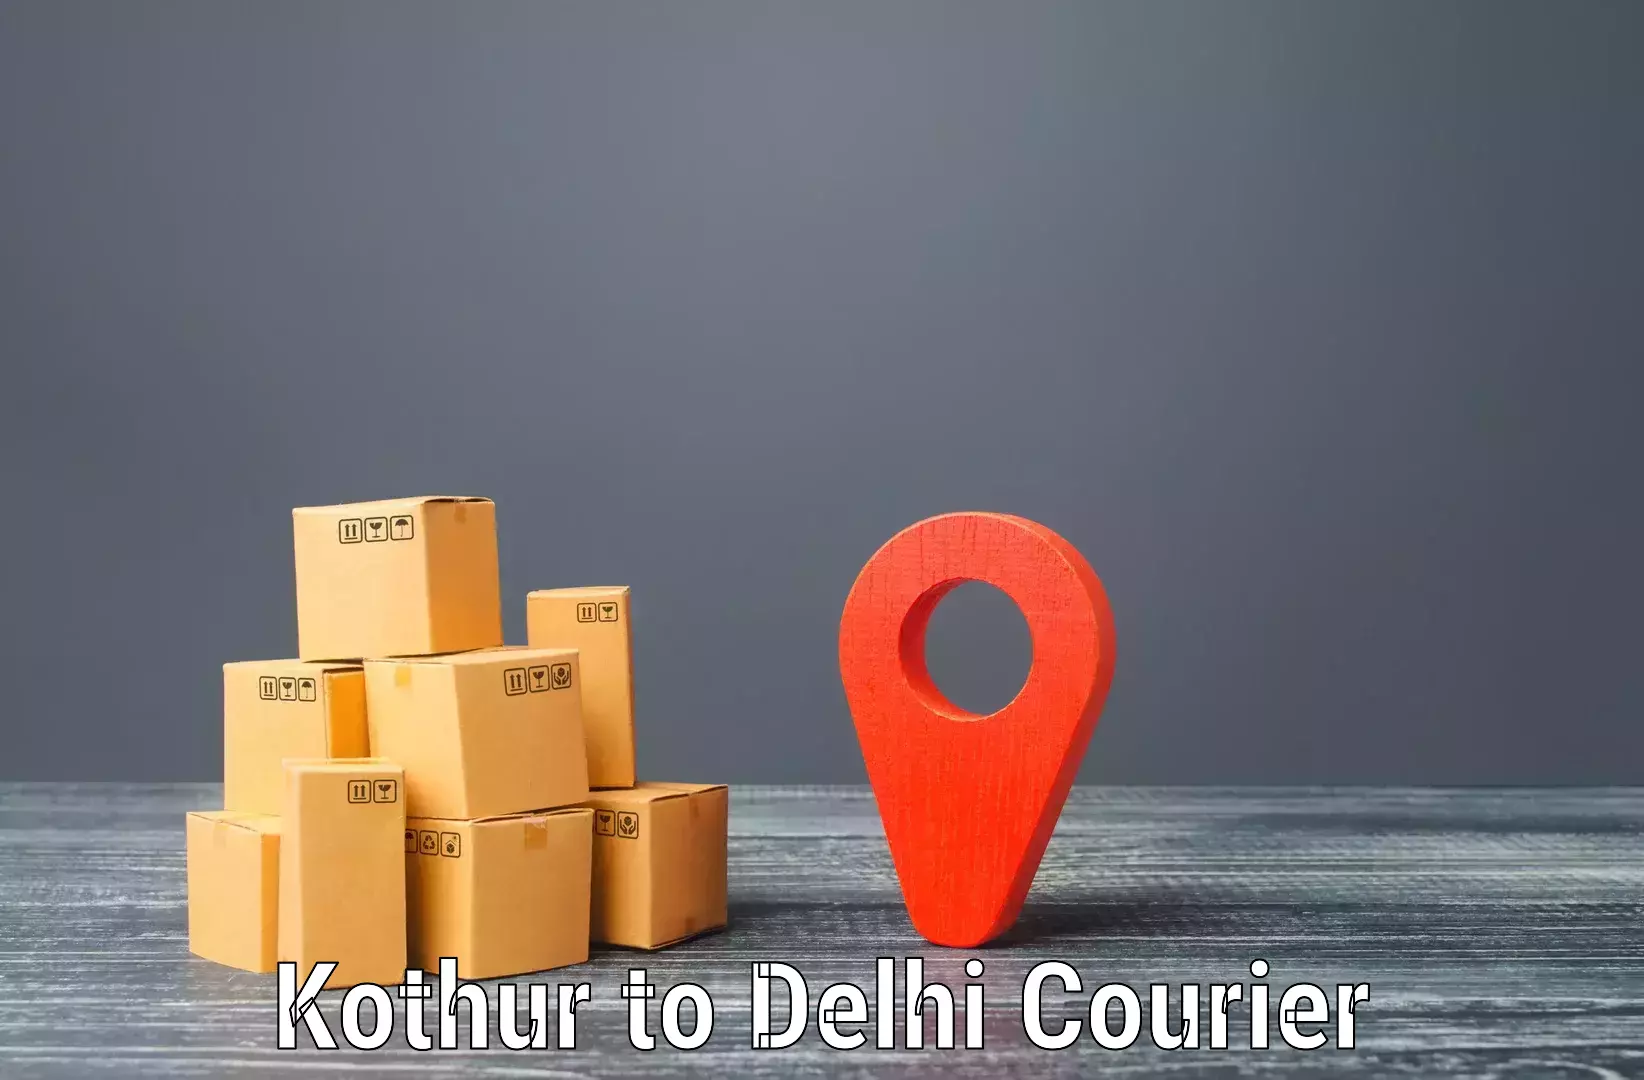 Nationwide delivery network Kothur to NCR